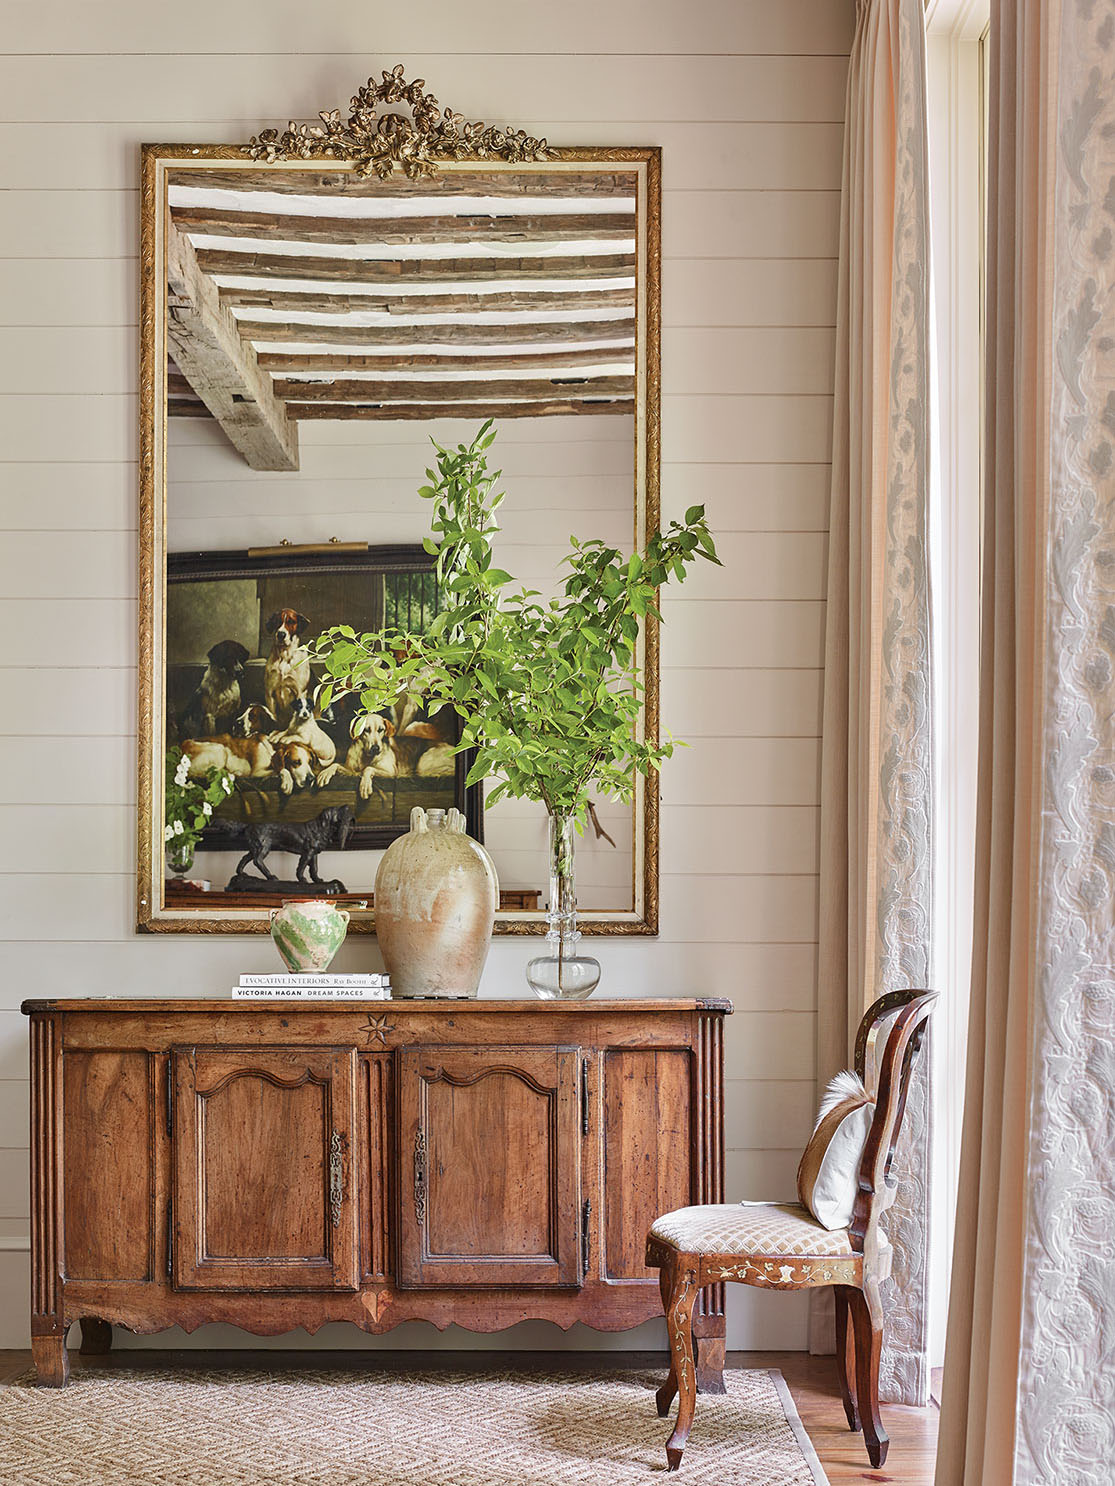 Other chic mountain house decorating ideas from this scene include a non-fussy French country-style natural wood console beneath the mirror. One top of the console are two rustic pottery jugs—one large and one small—a small stack of books, and a simple arrangement of green branches in a clear glass vase with an interesting shape. An antique French chair sits by the window, framed by soft white floor-to-ceiling curtains in curtains in a white-on-white, raised botanical pattern fabric